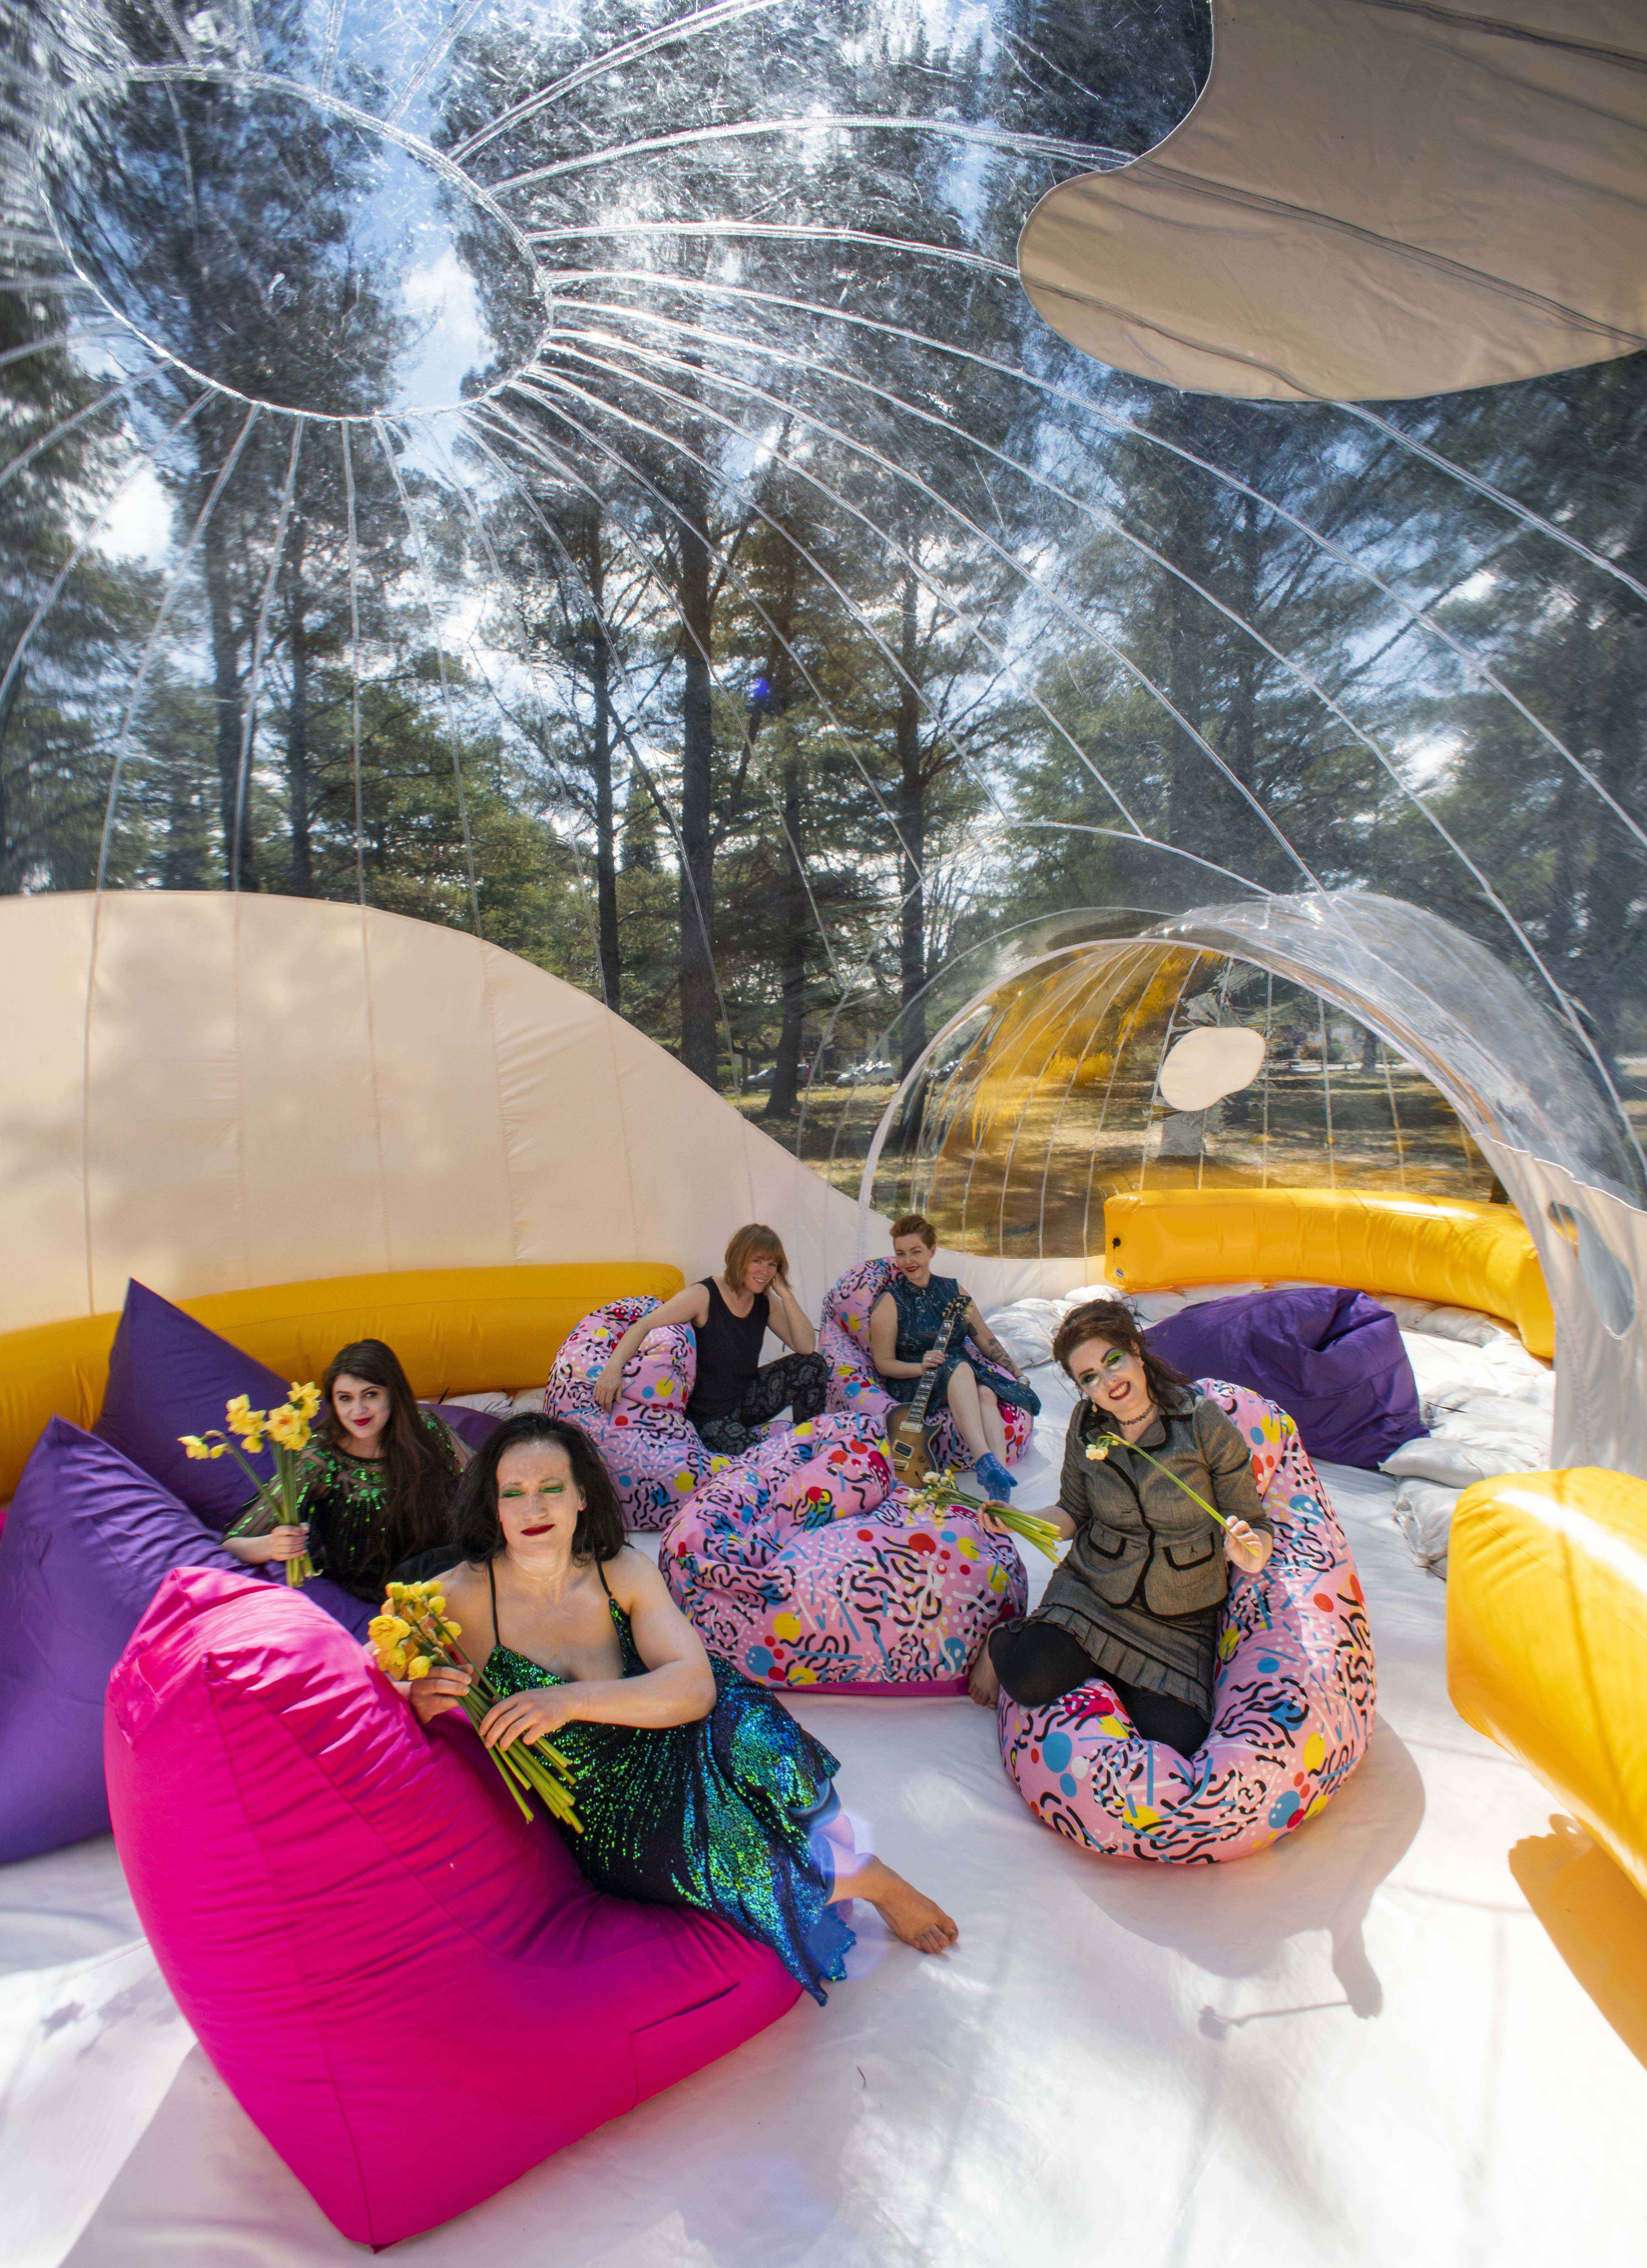 Experience the Canberra Bubble at Haig Park